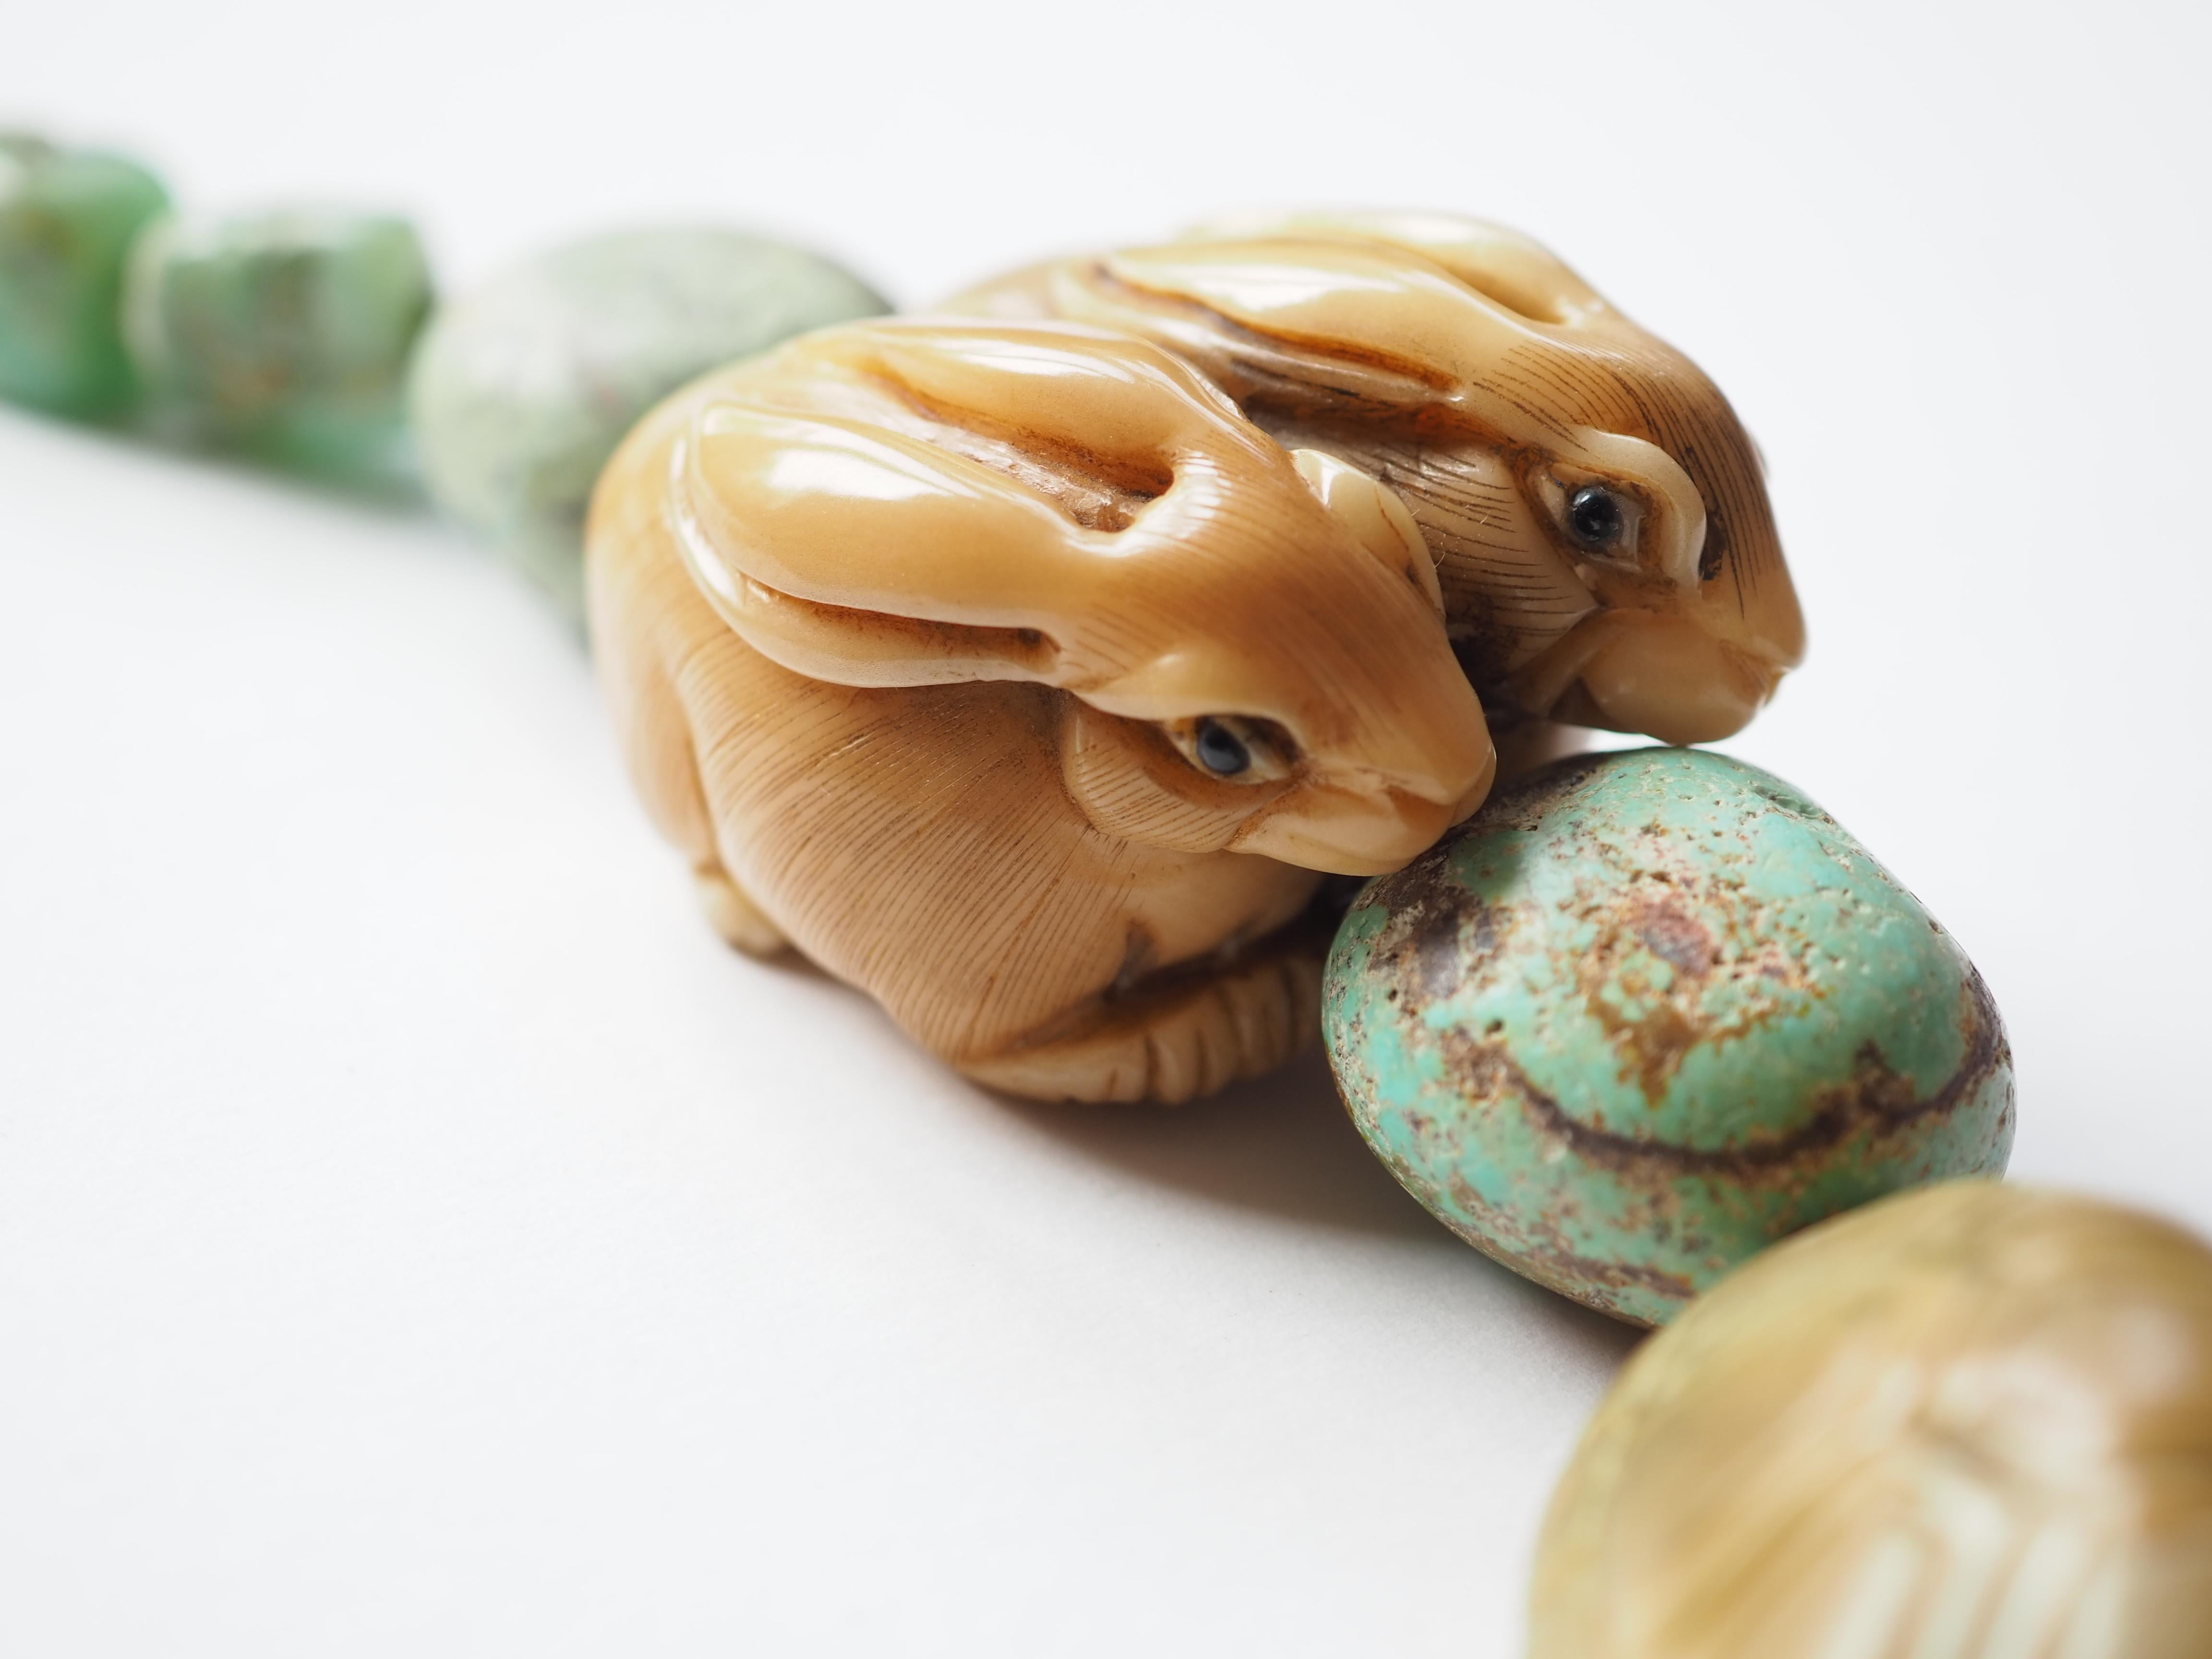 Antiques turquoise stone, rare and big with netsuke in different animal shape, rabbits, turtle and mouse linked in silver.
Measure 48 cm.
All Giulia Colussi jewelry is new and has never been previously owned or worn. Each item will arrive at your